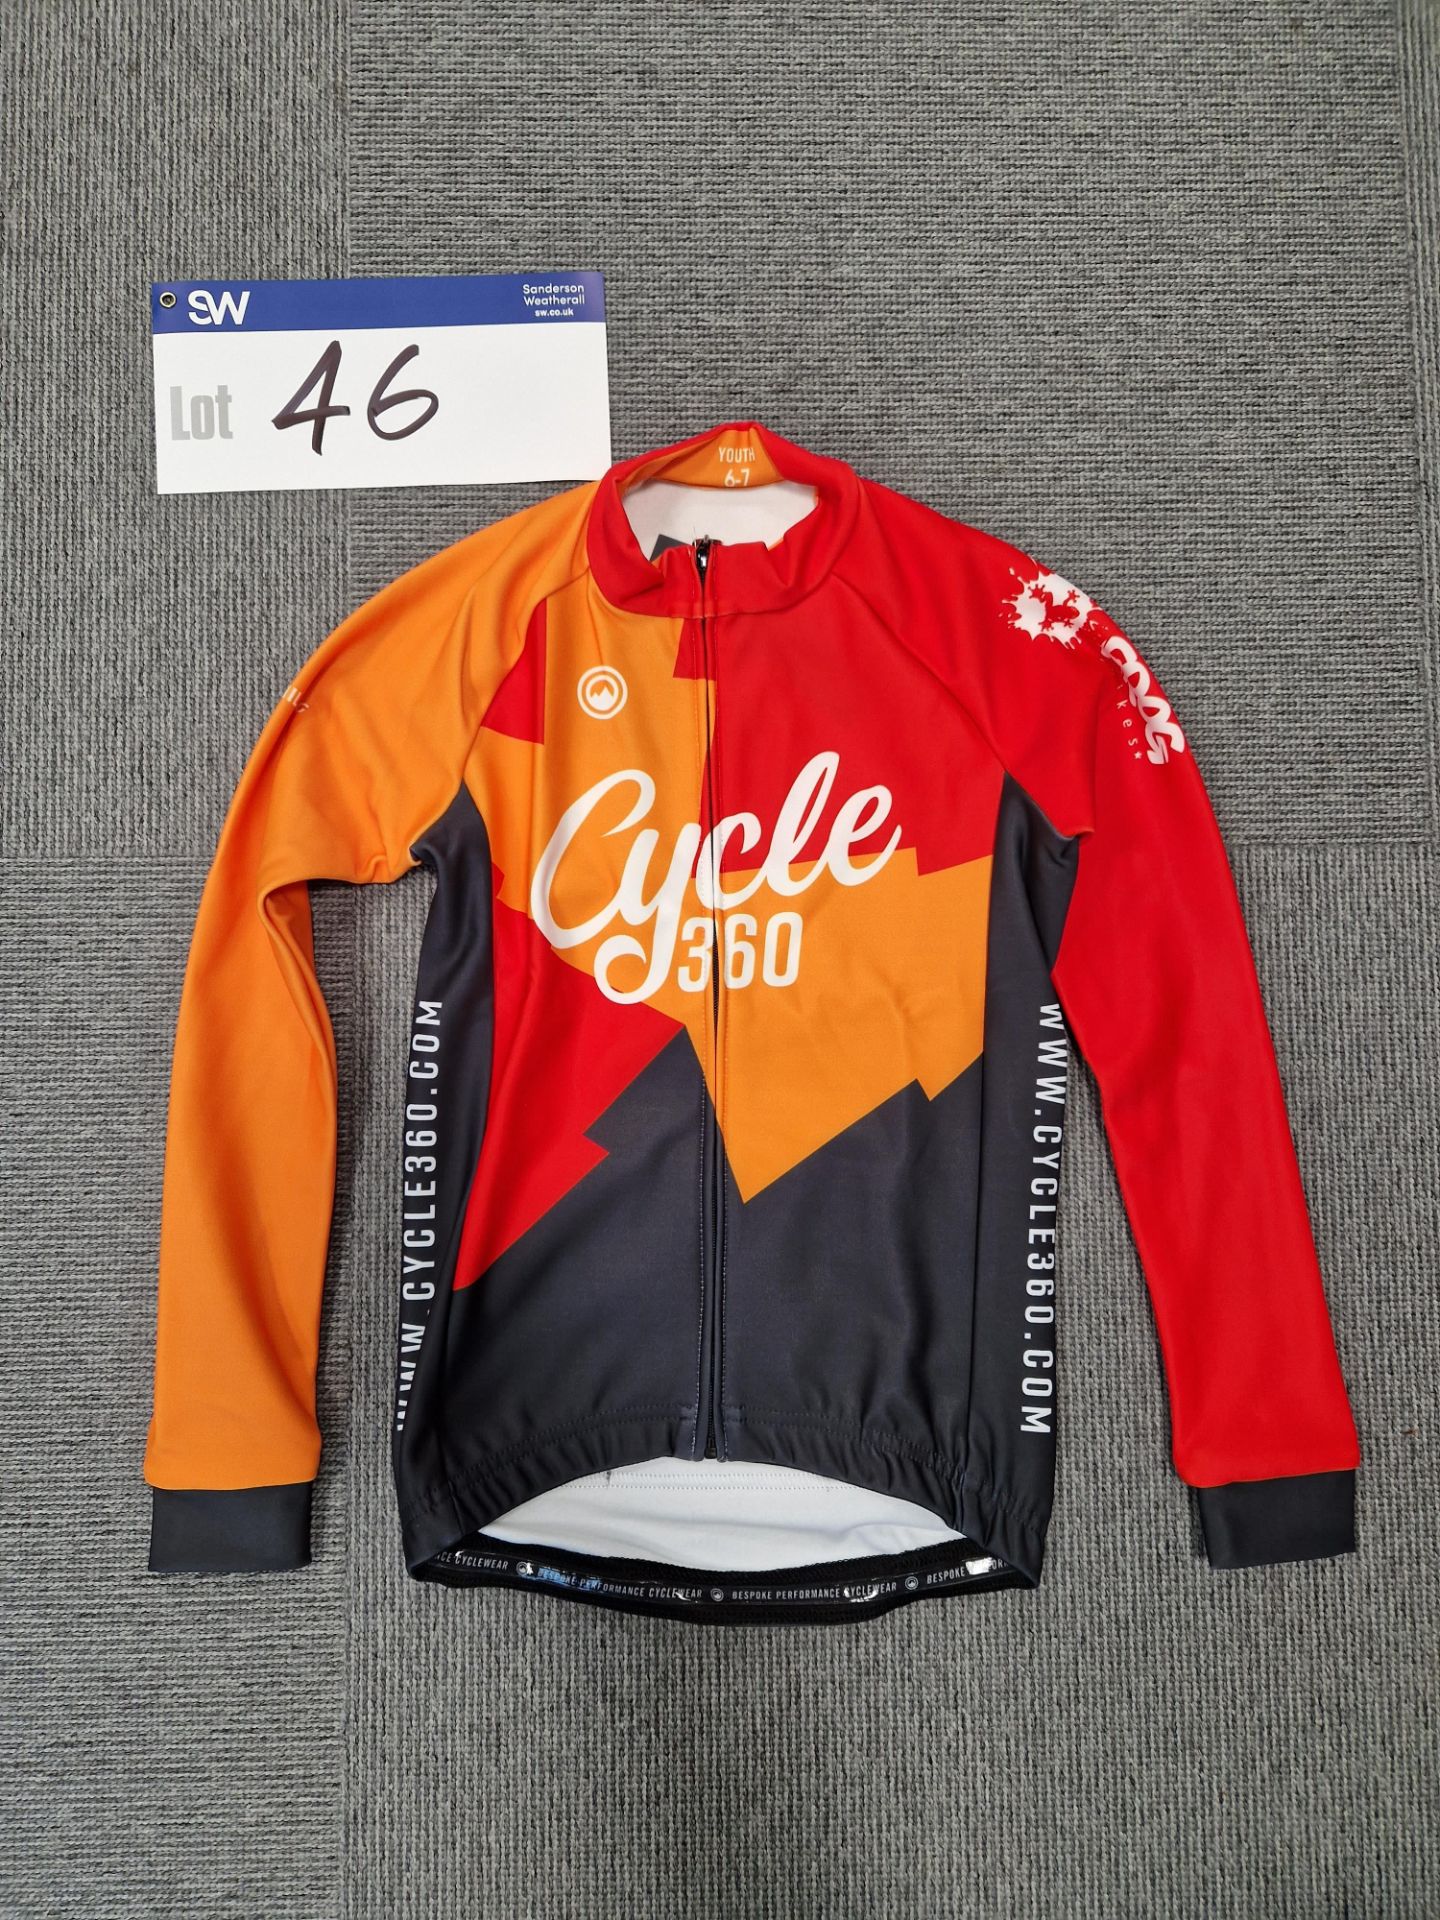 Youth's 6-7 Milltag Cycling Jacket, Branded Cycle 360, 100% PolyesterPlease read the following